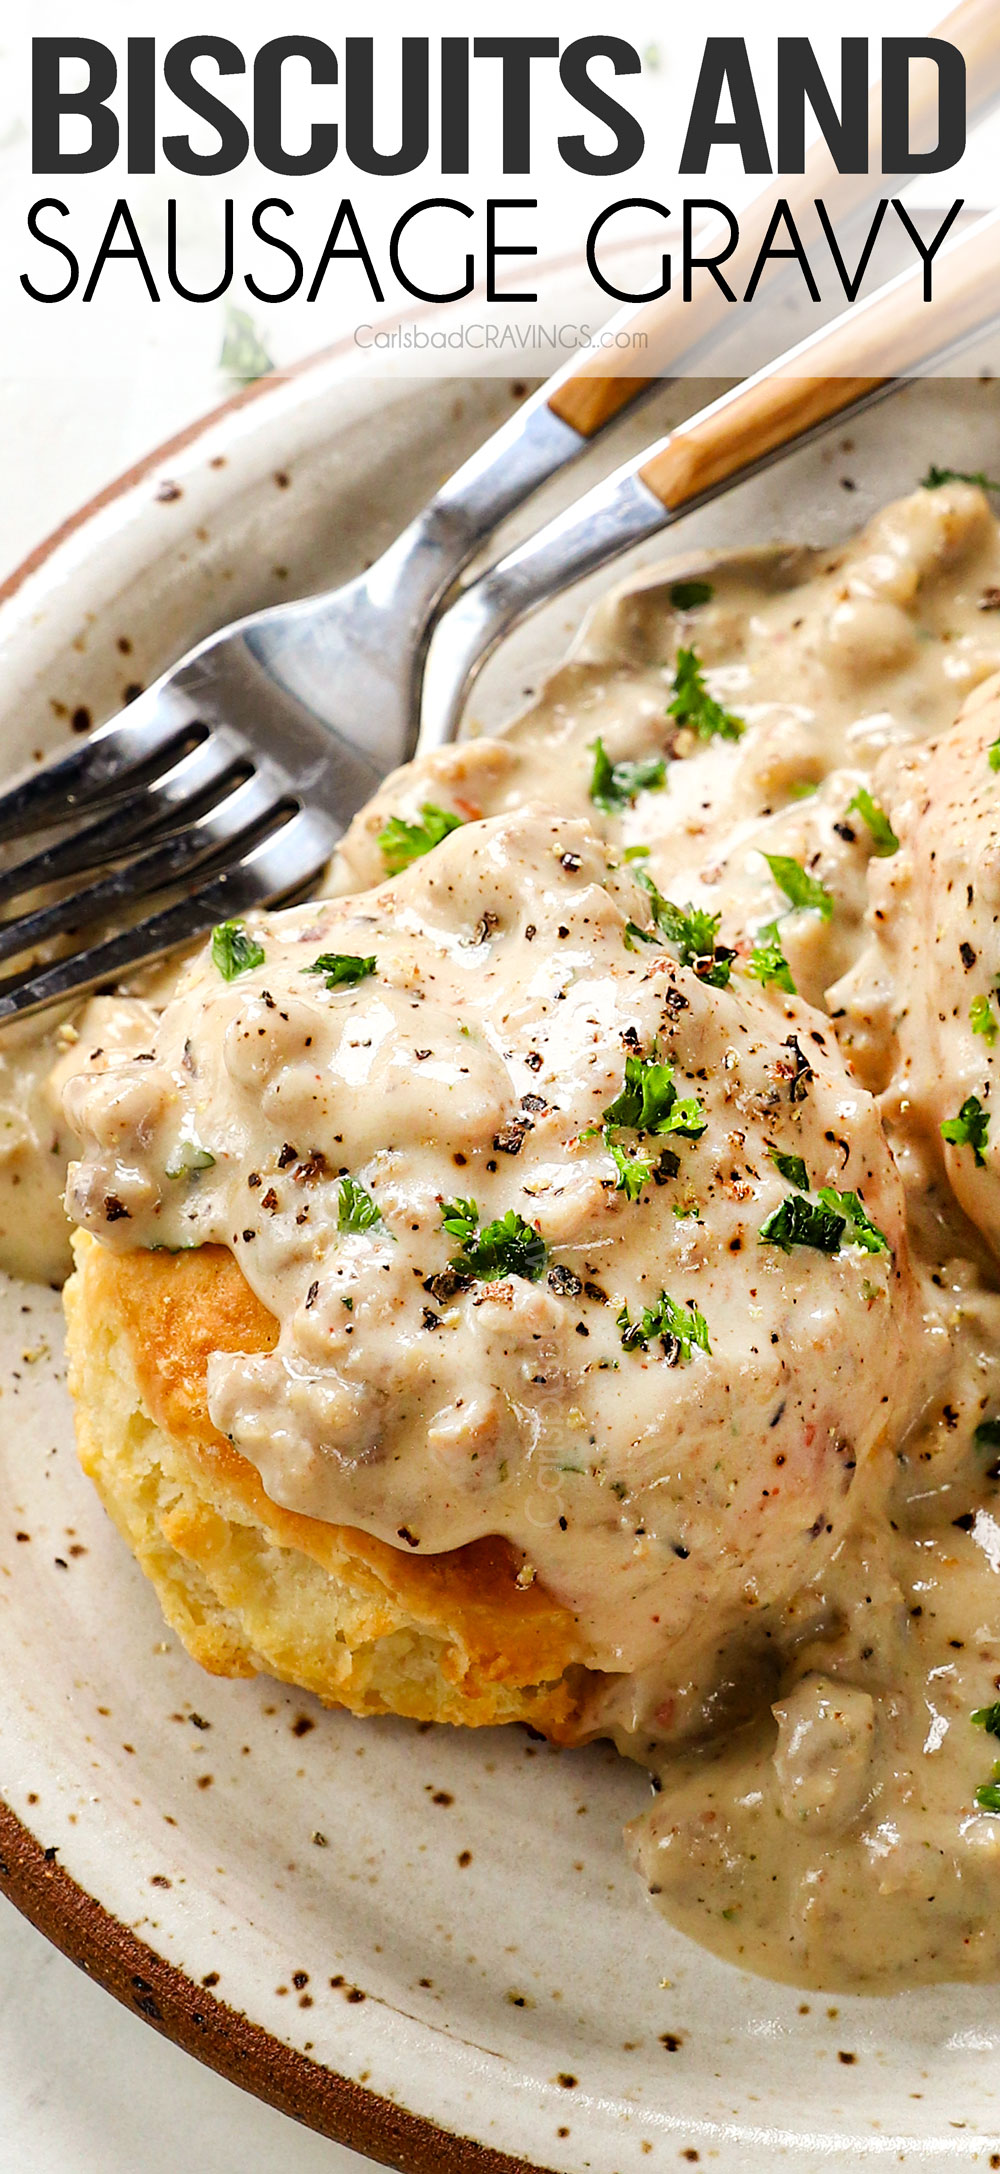 up close of biscuits and gravy recipe served with homemade buttermilk biscuits and sausage gravy on a plate garnished by parsley and freshly cracked pepper